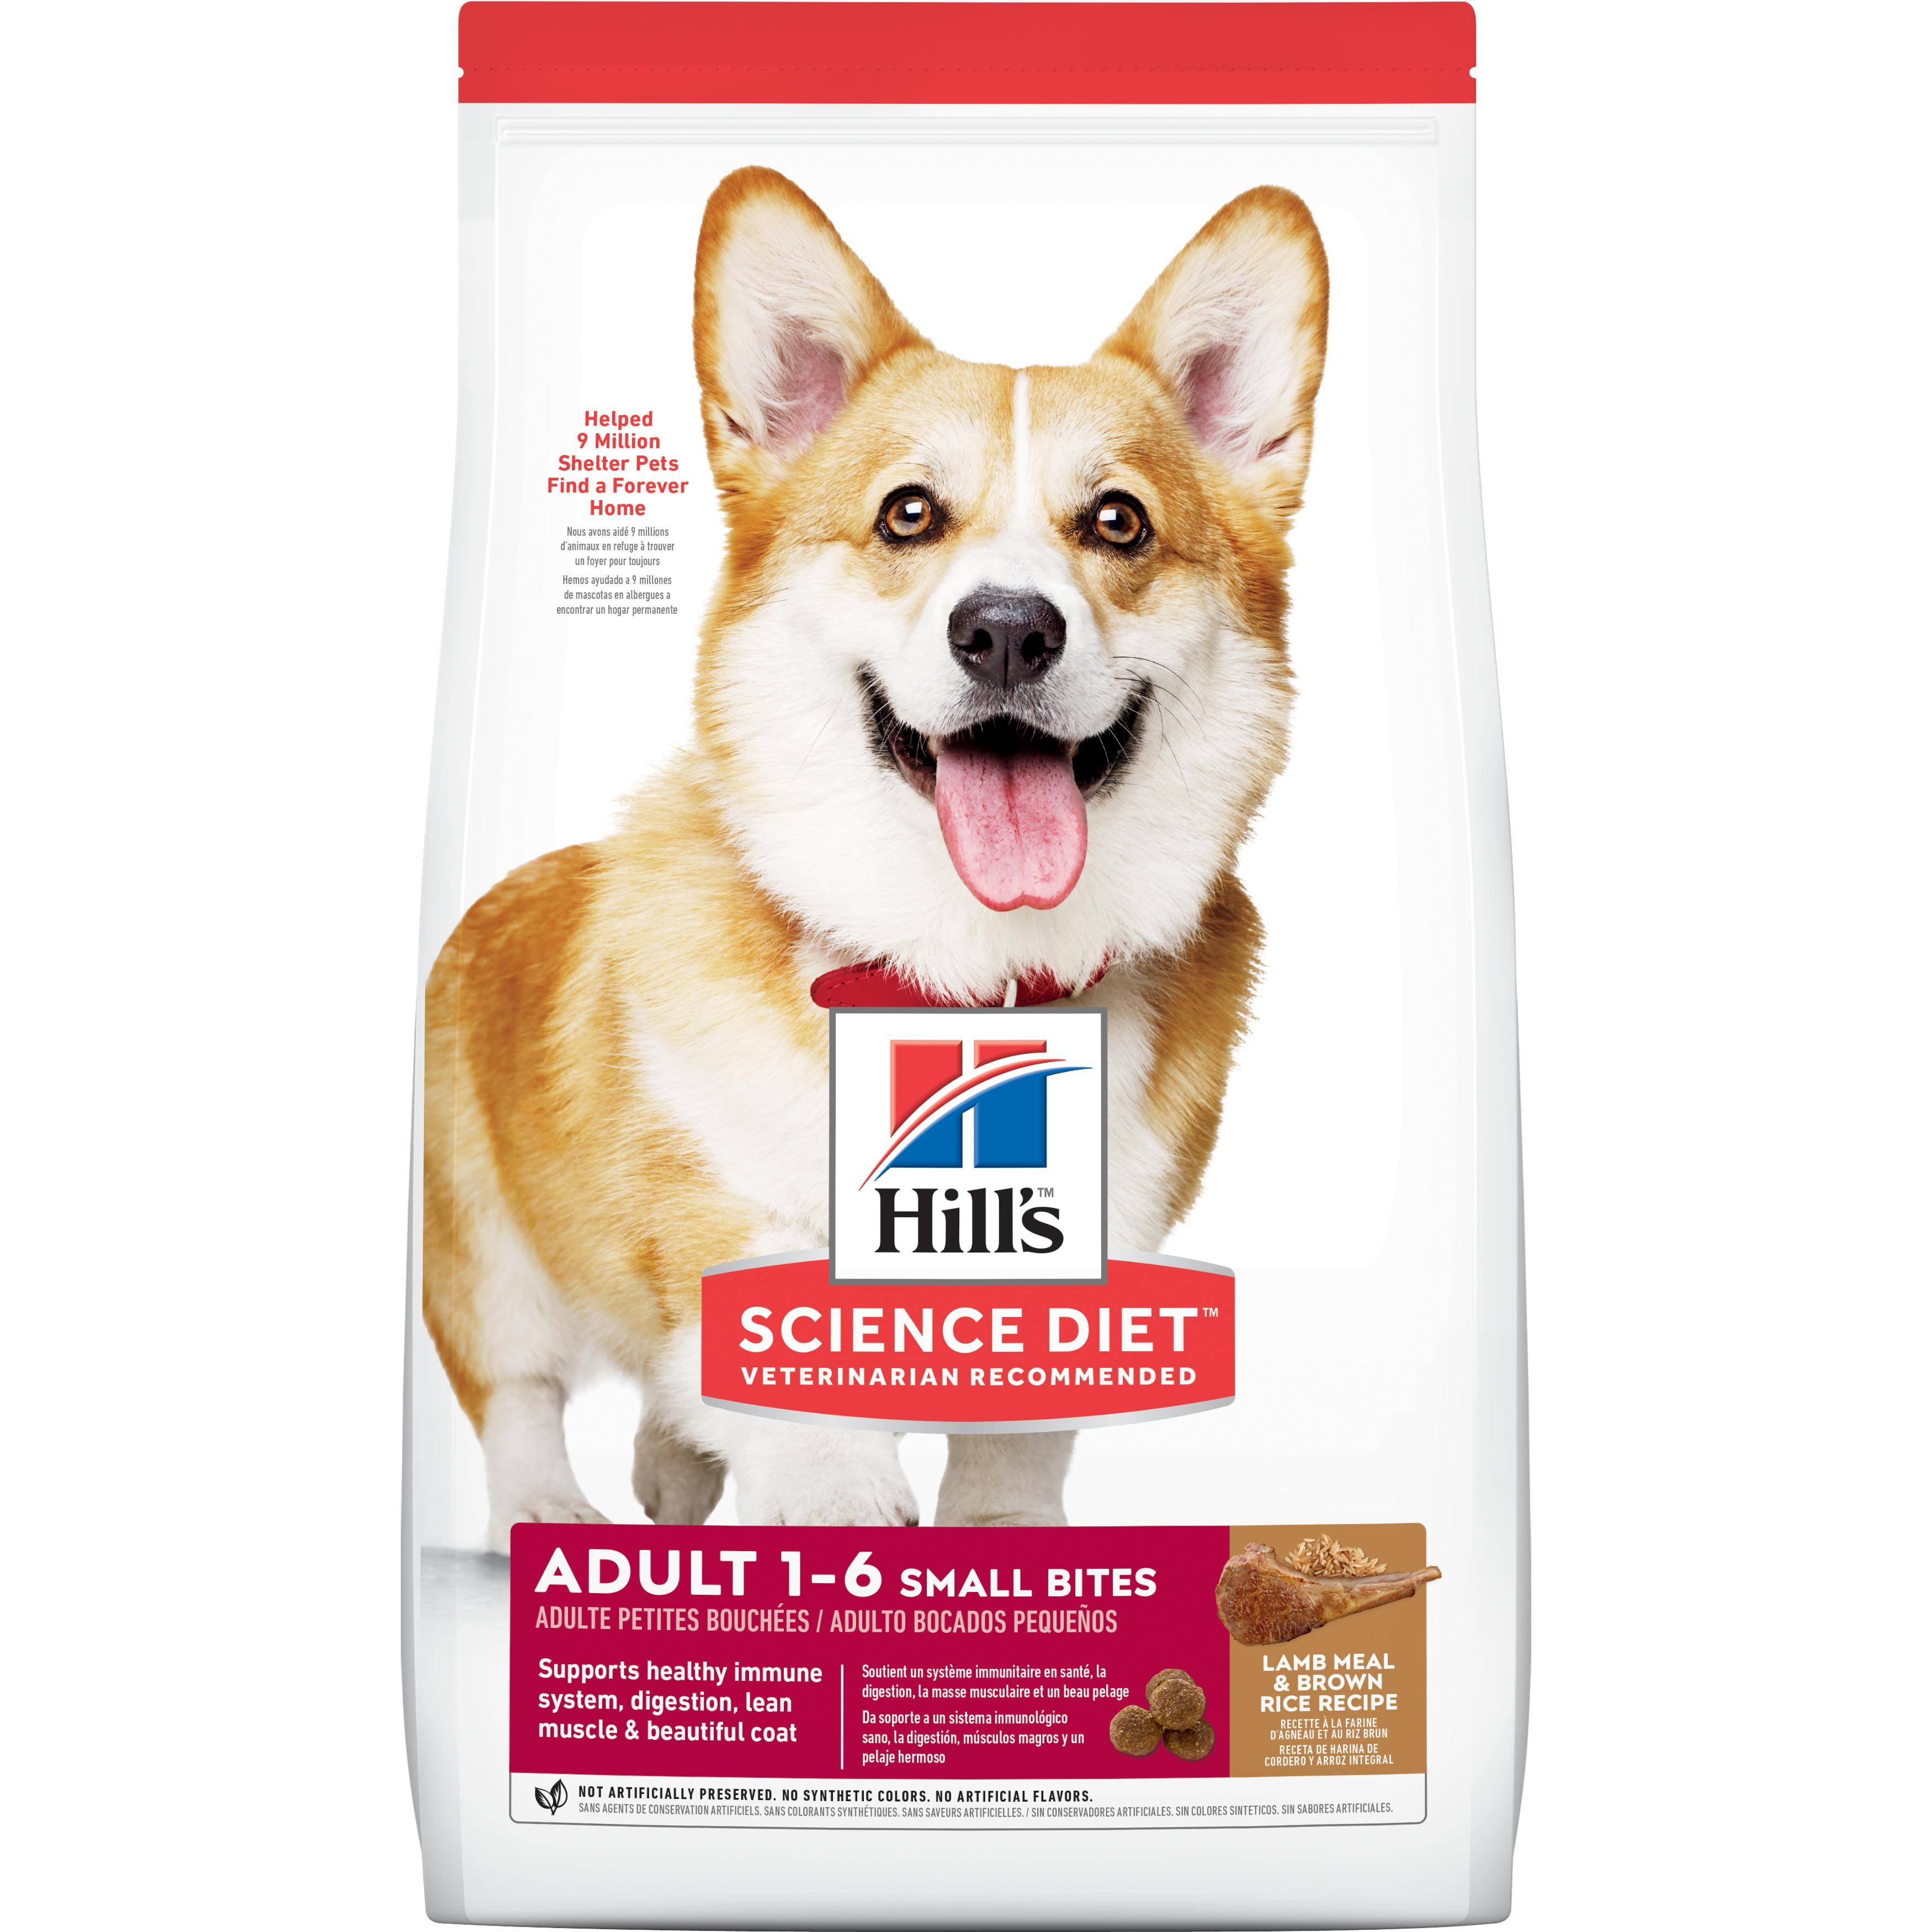 Hill's Science Diet Small Bites Premium Natural Dog Food - Lamb Meal & Rice Recipe, Adult 1-6, 14.5lbs